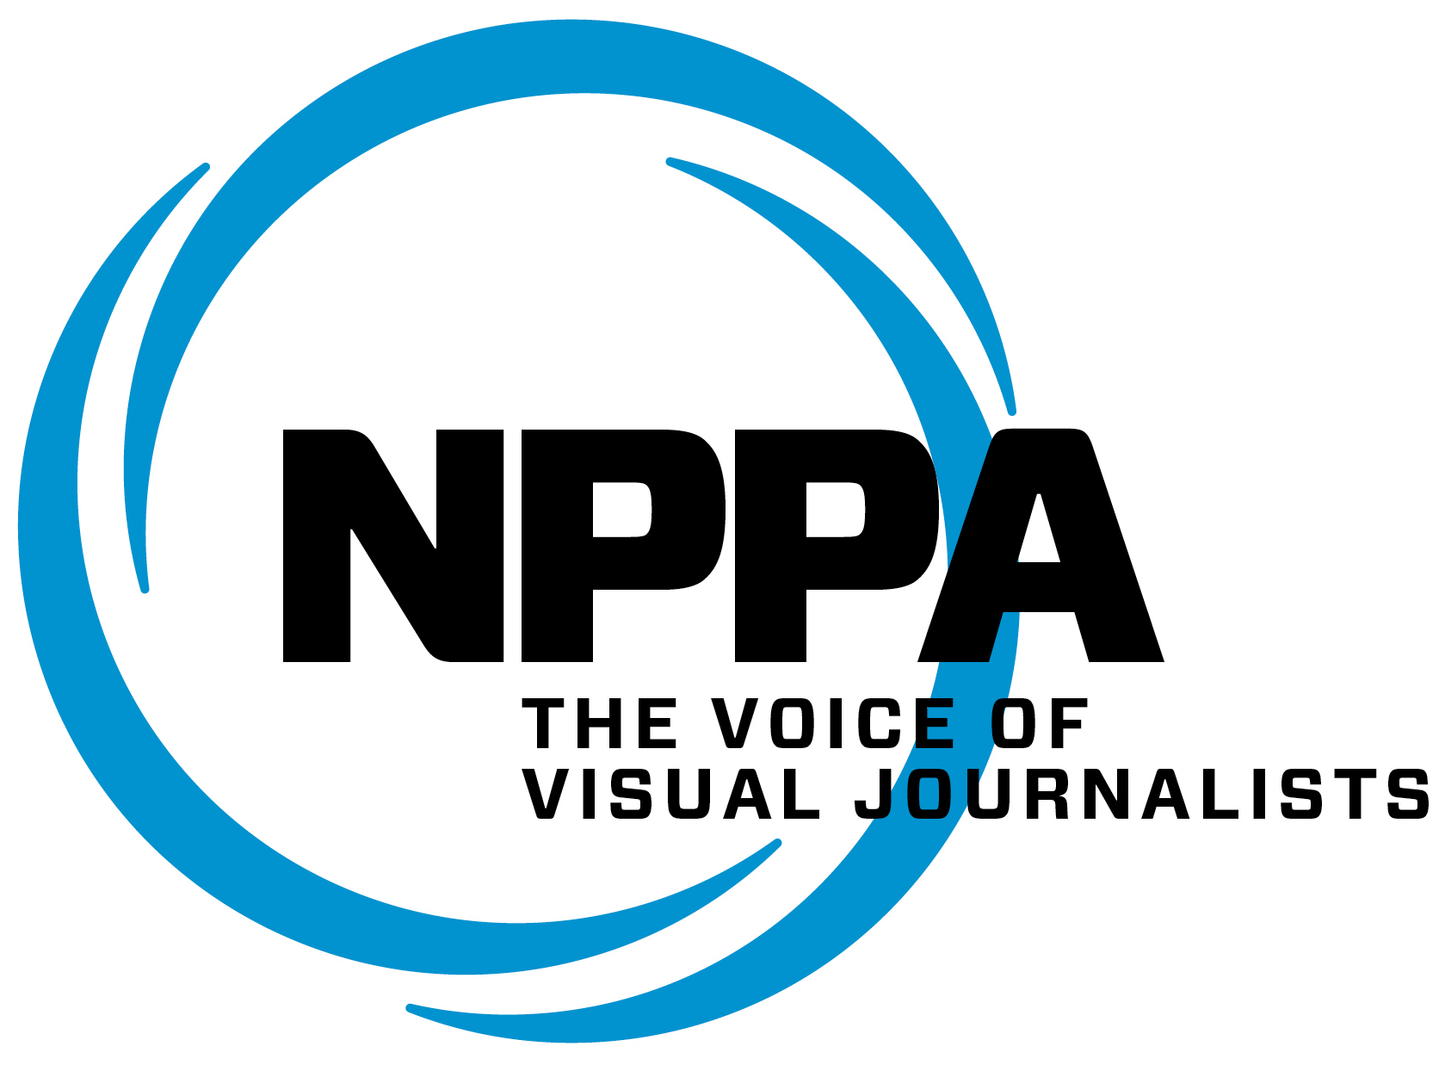 NPPA Names Think Tank Photo Winner of J. Winton Lemen Award for Outstanding Technical Achievement in Photography